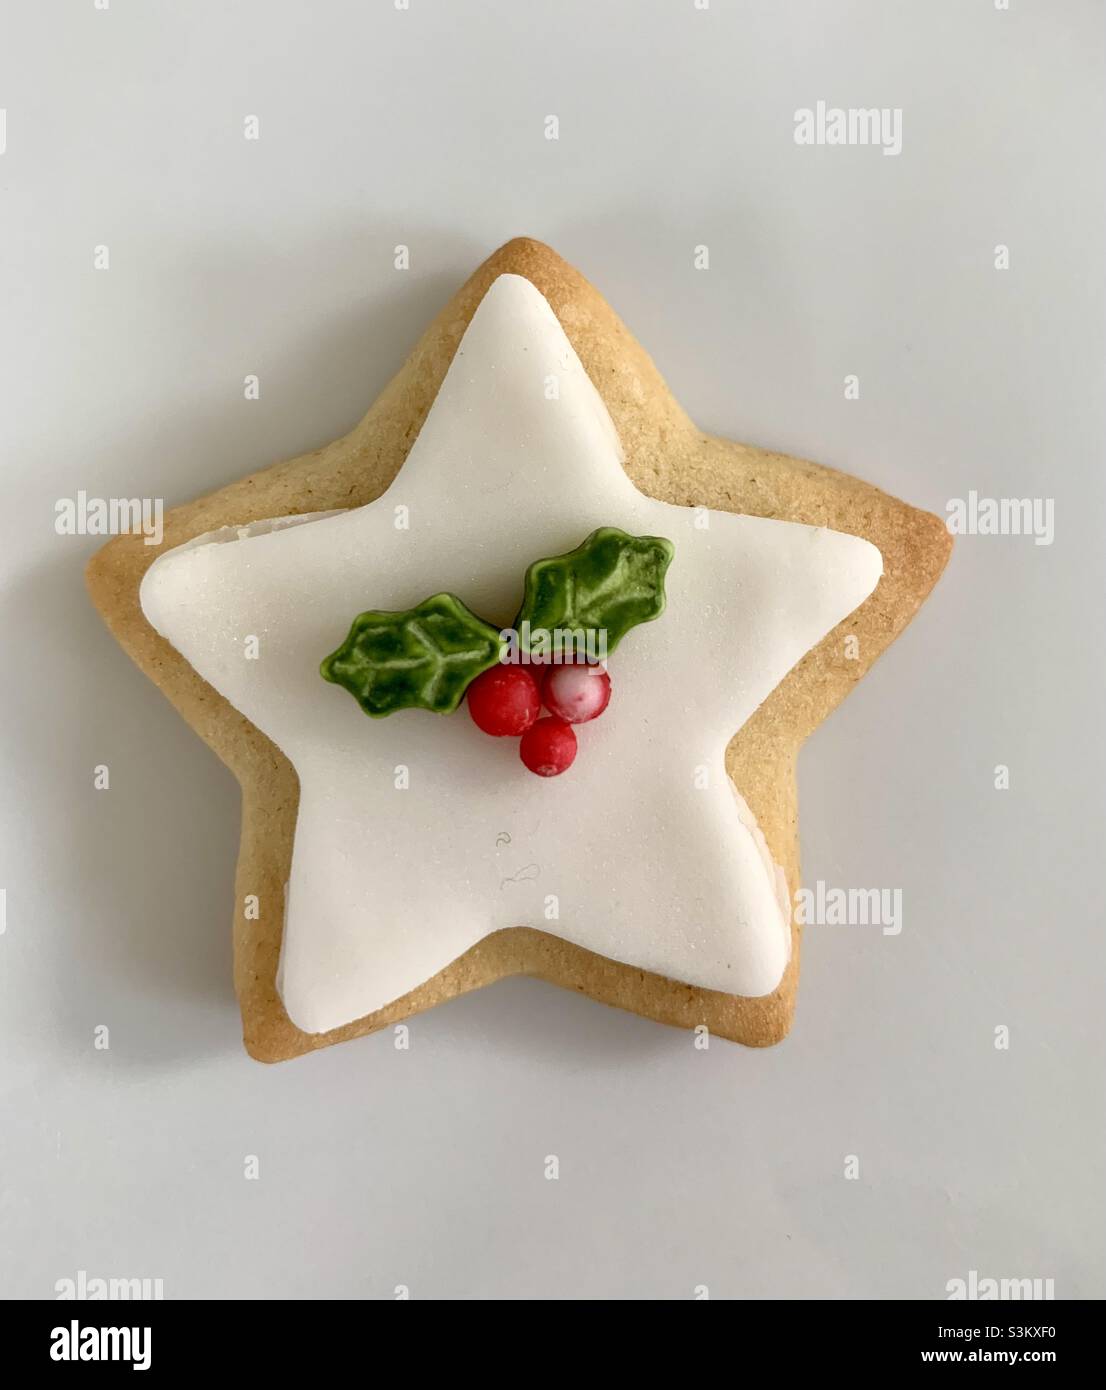 Homemade Christmas iced star biscuit with holly decorations Stock Photo